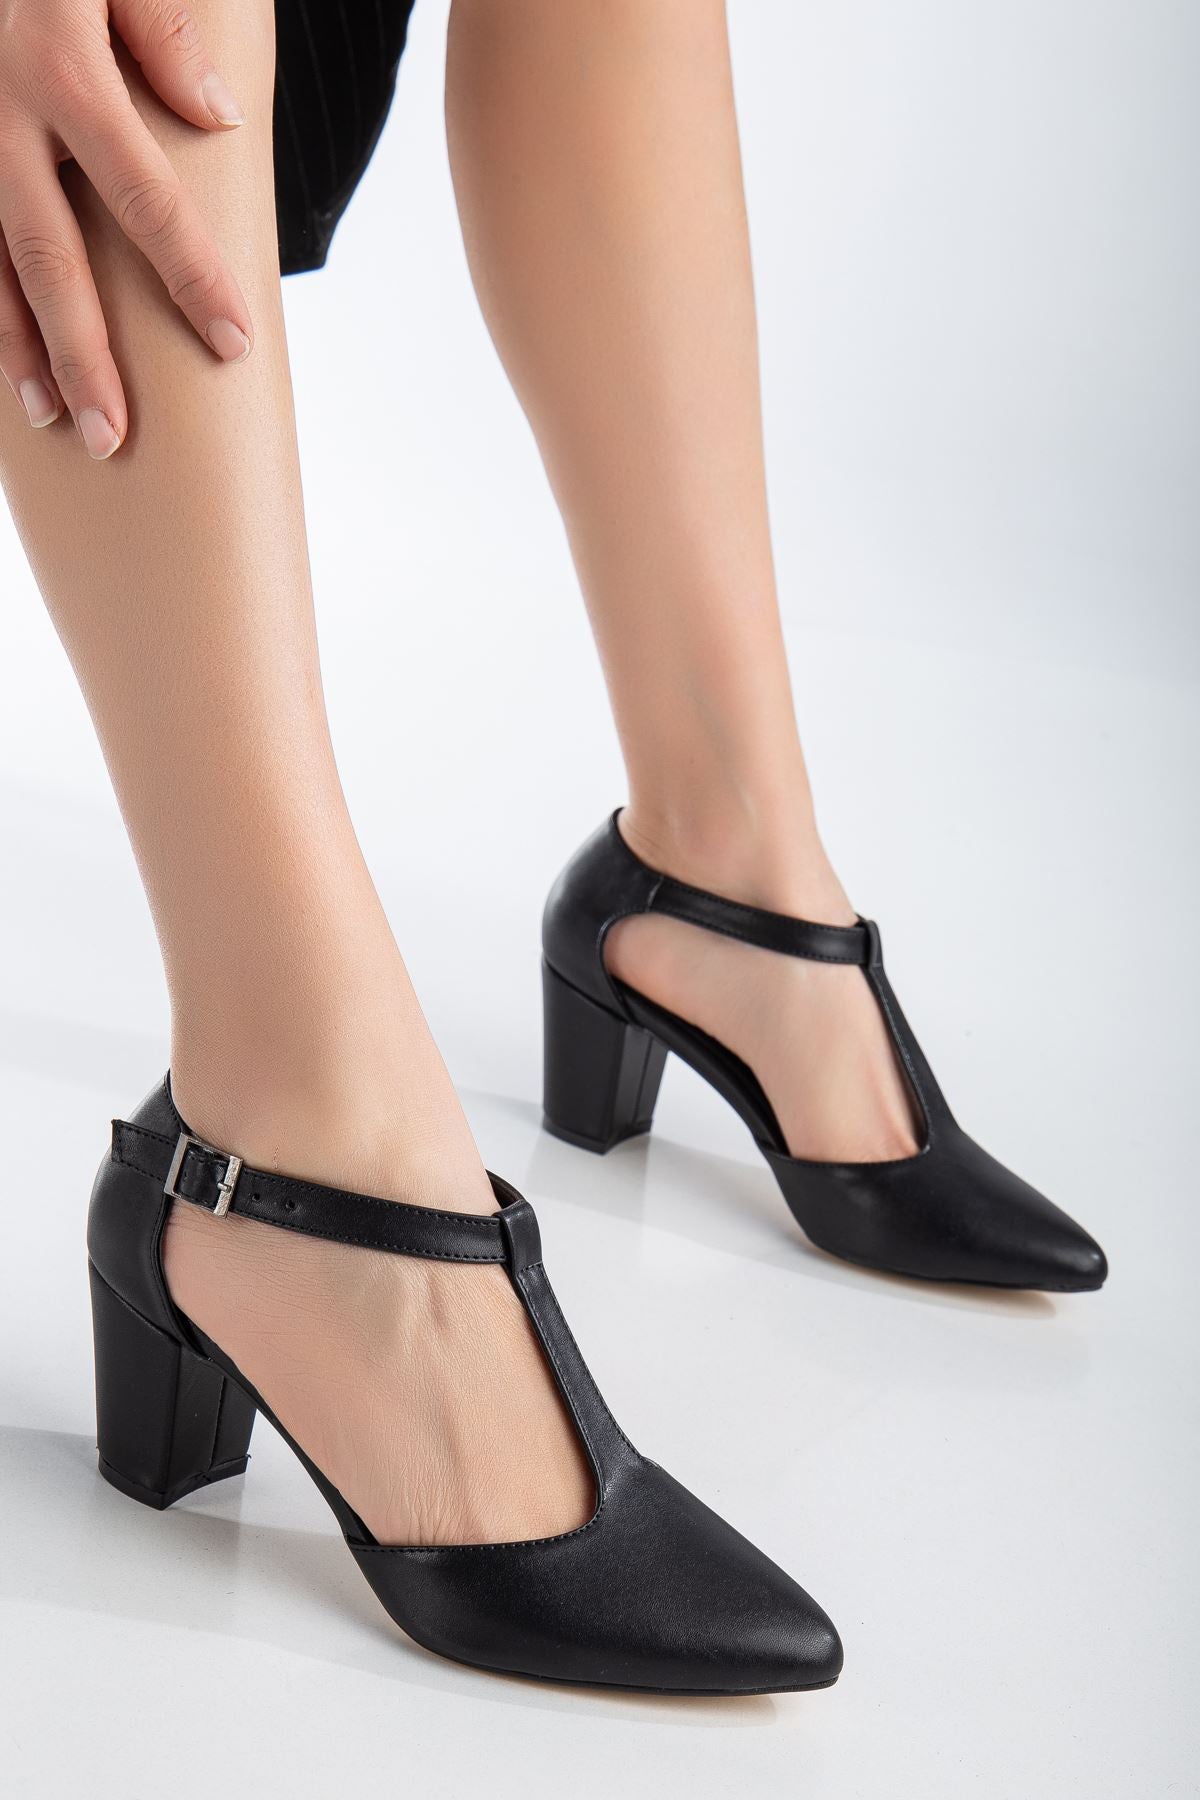 Niven Black Leather Heeled Women's Shoes - STREETMODE ™